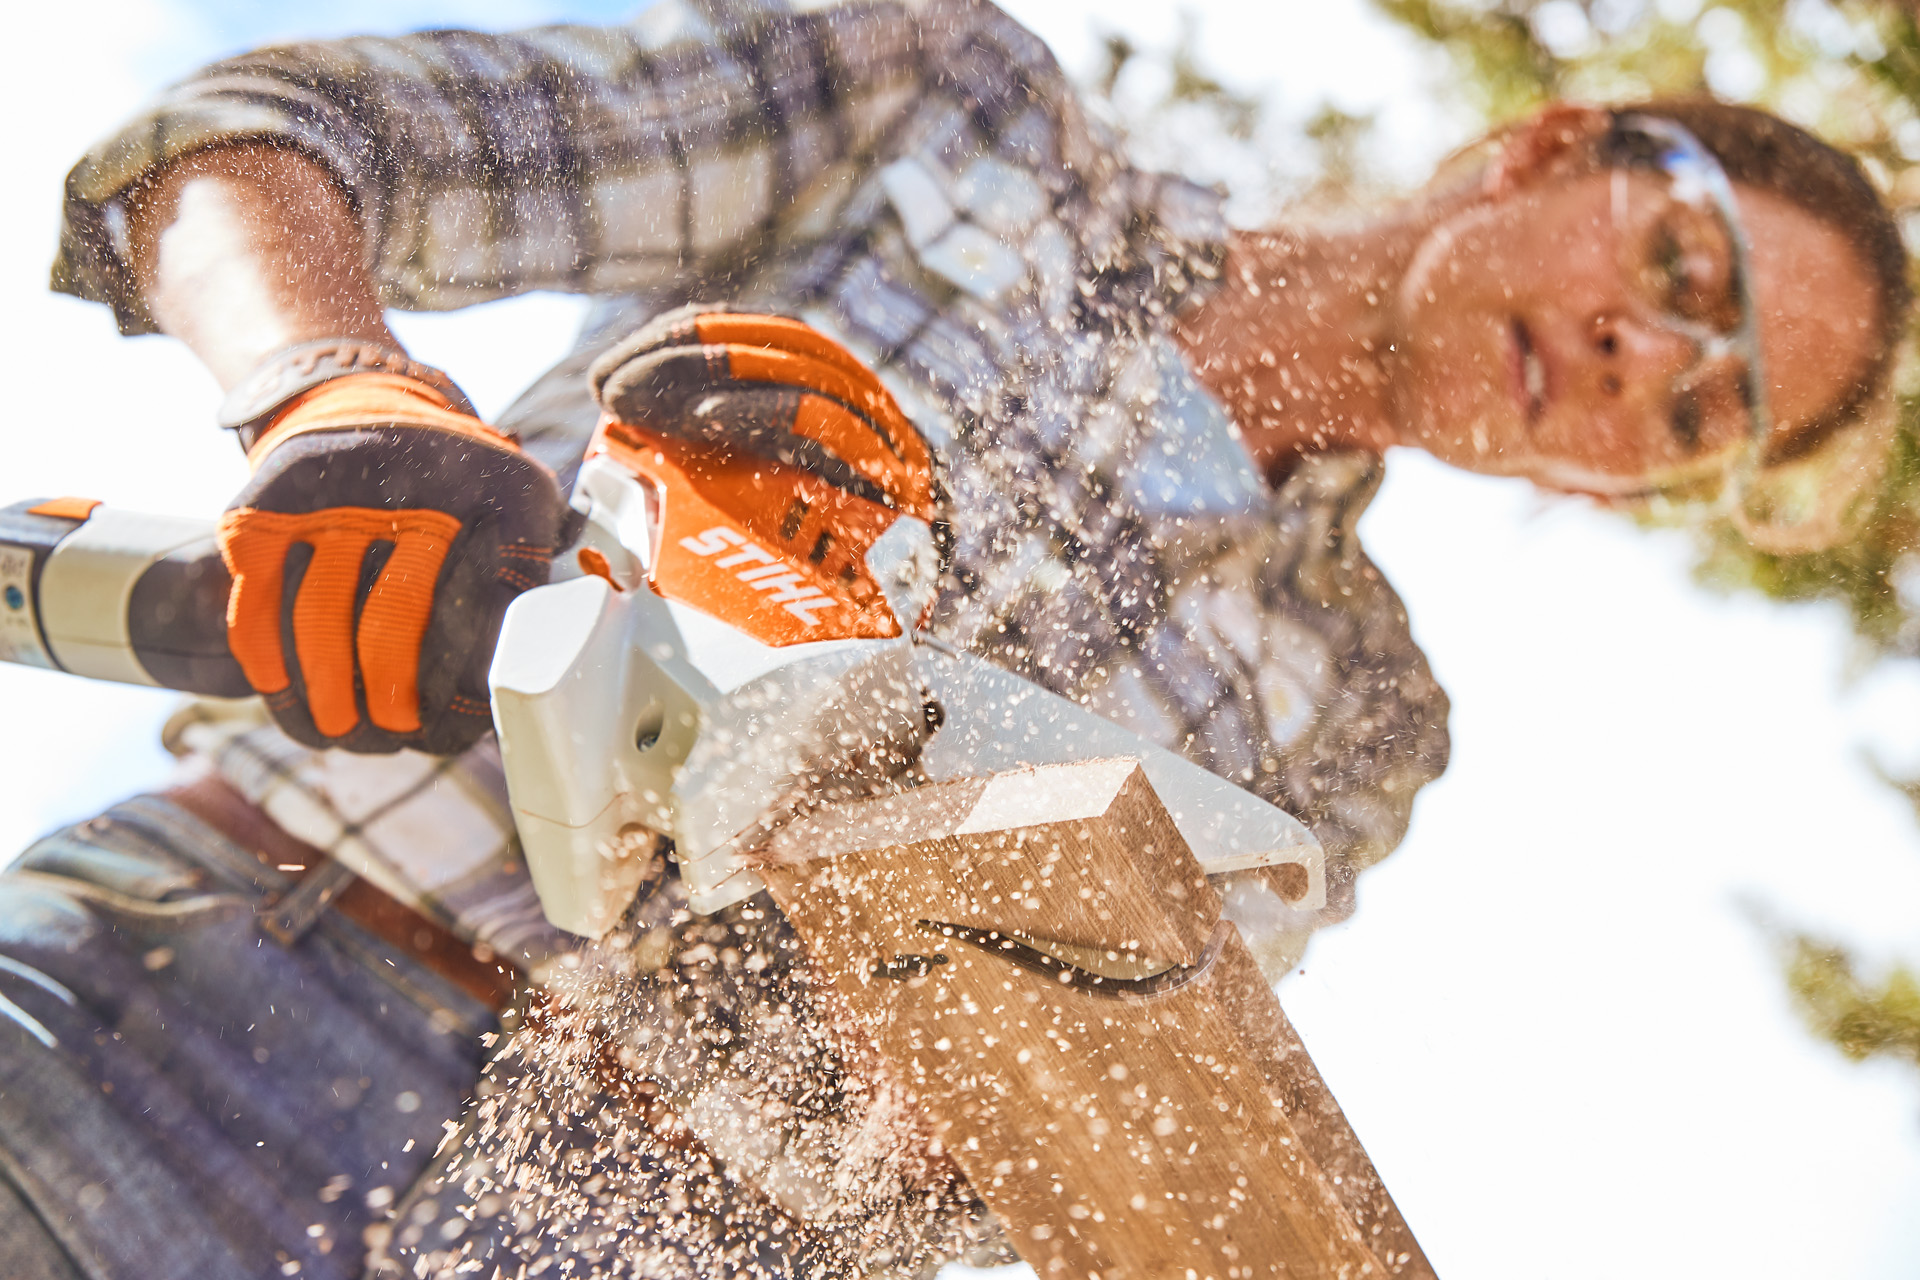 Woman with safety glasses cuts a tree slice with the STIHL GTA 26 cordless garden pruner